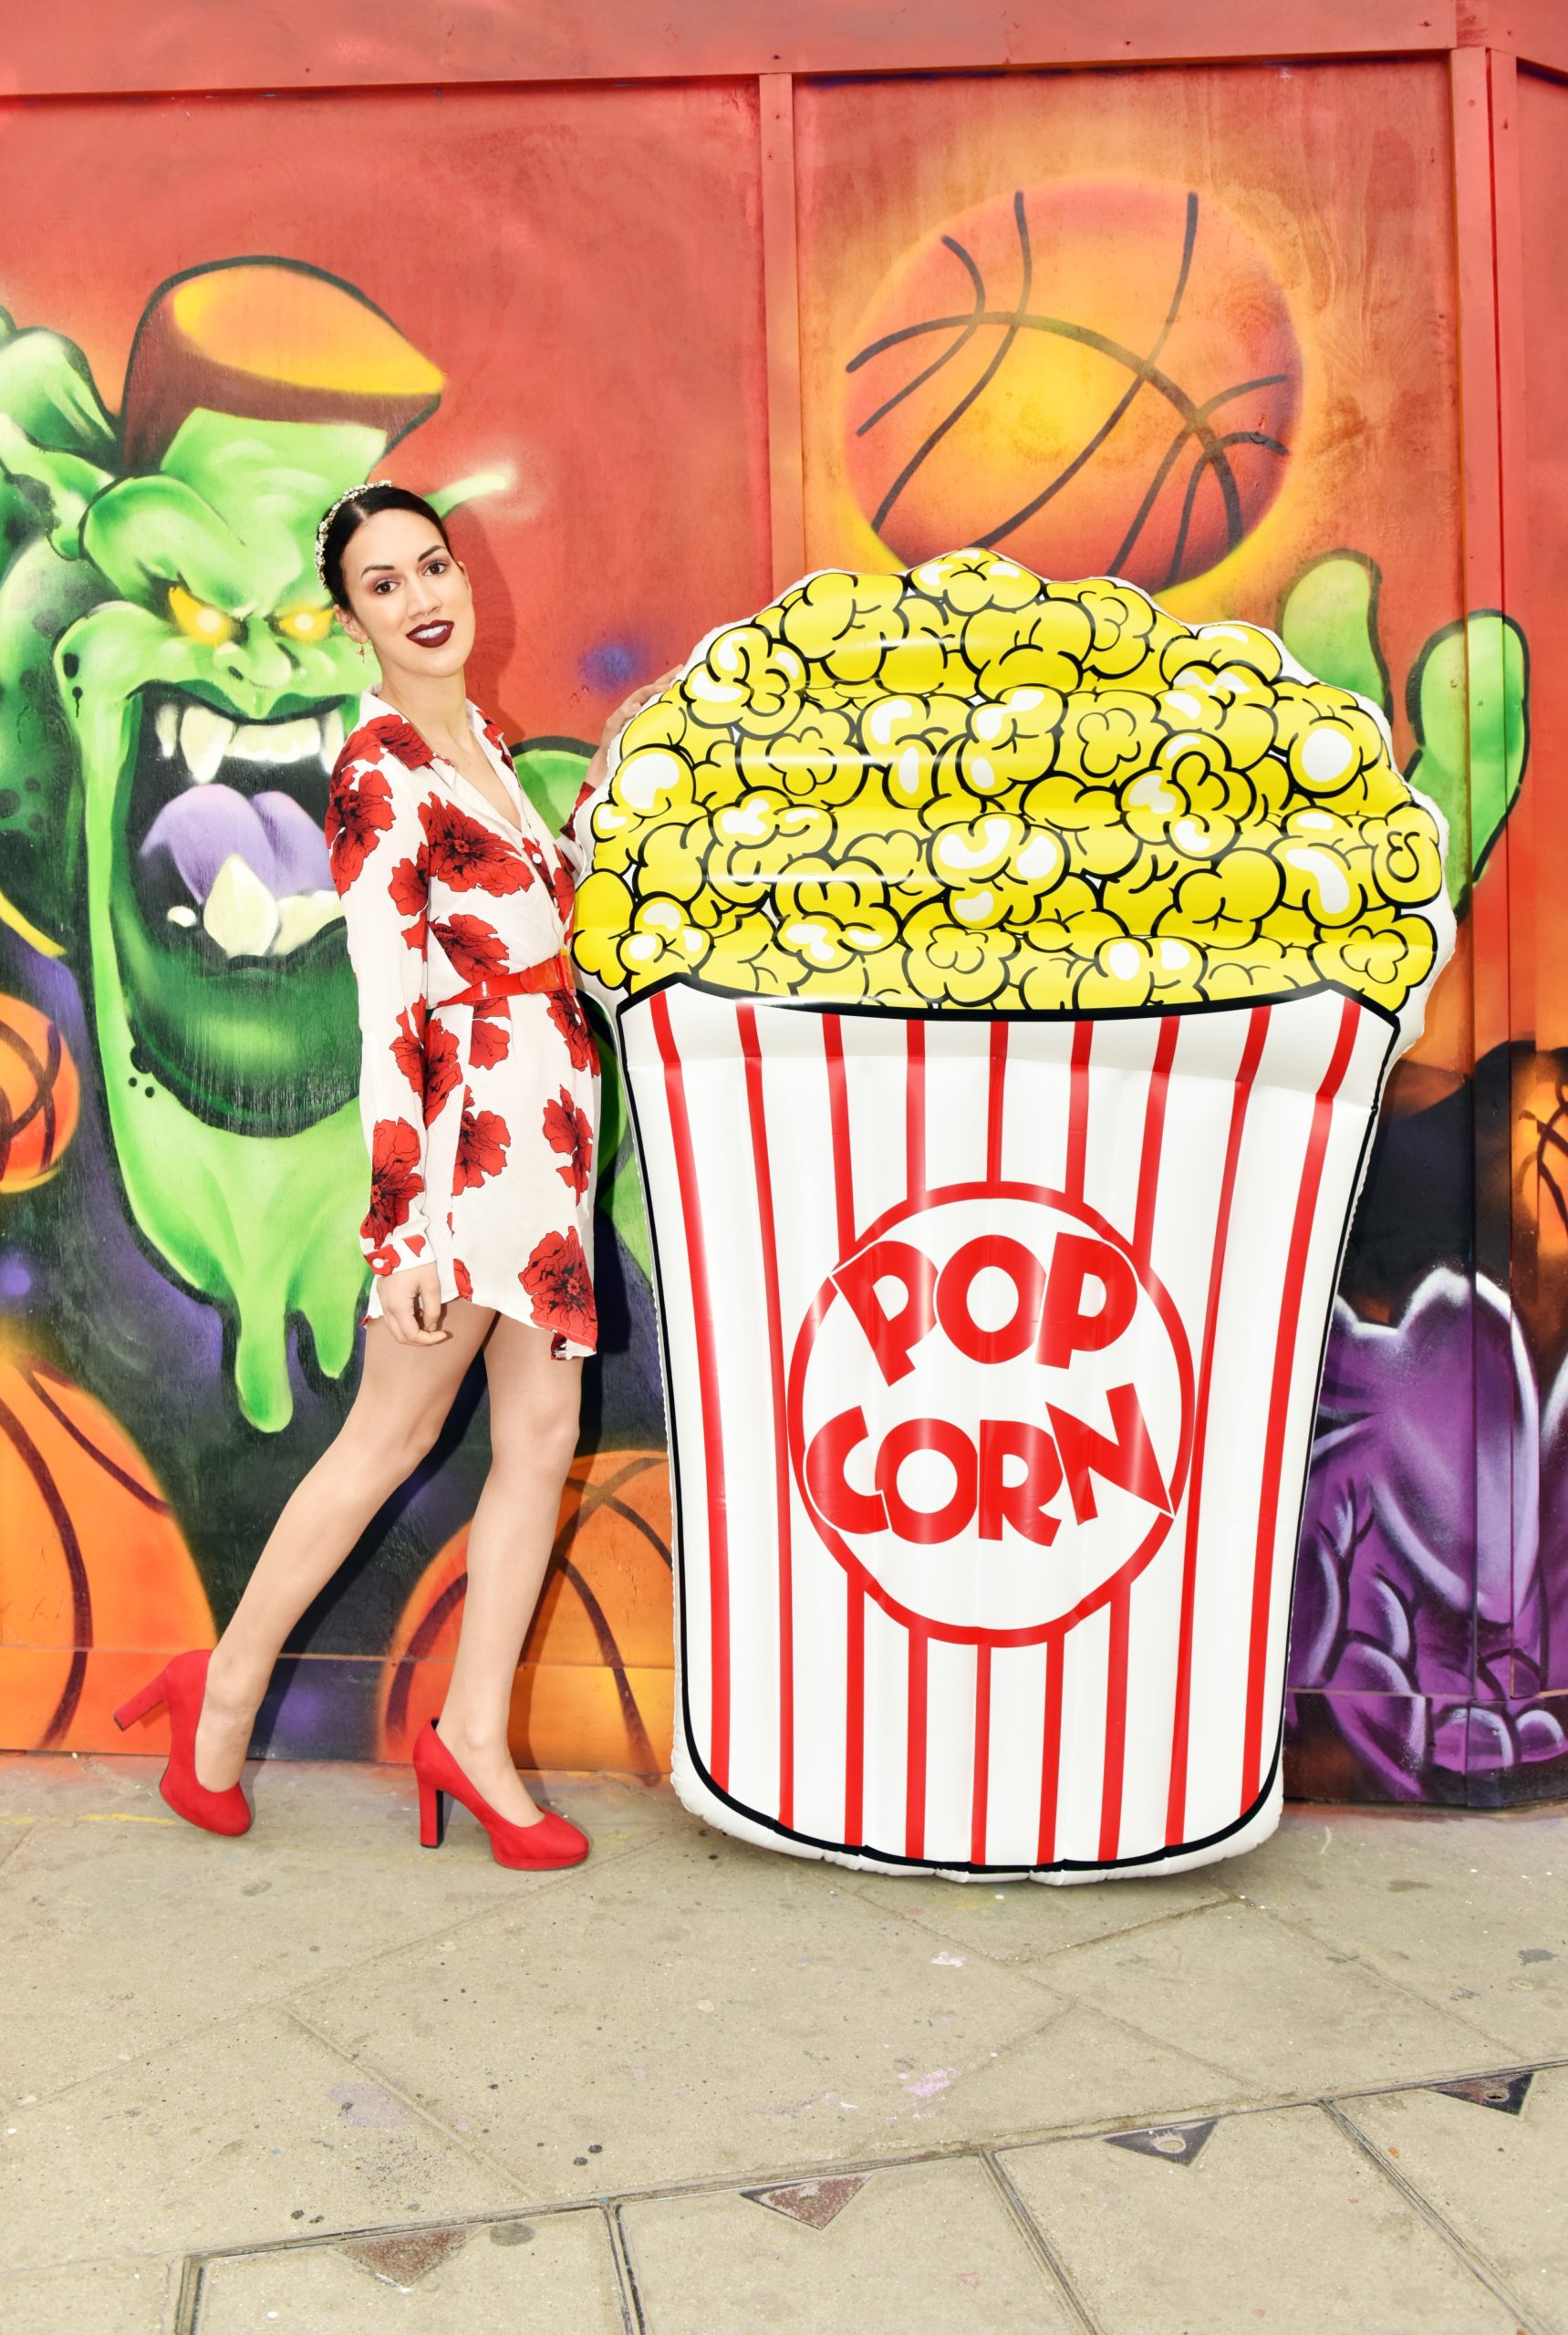 <img src="ana.jpg" alt="ana with yellow and red popcorn float"/> 